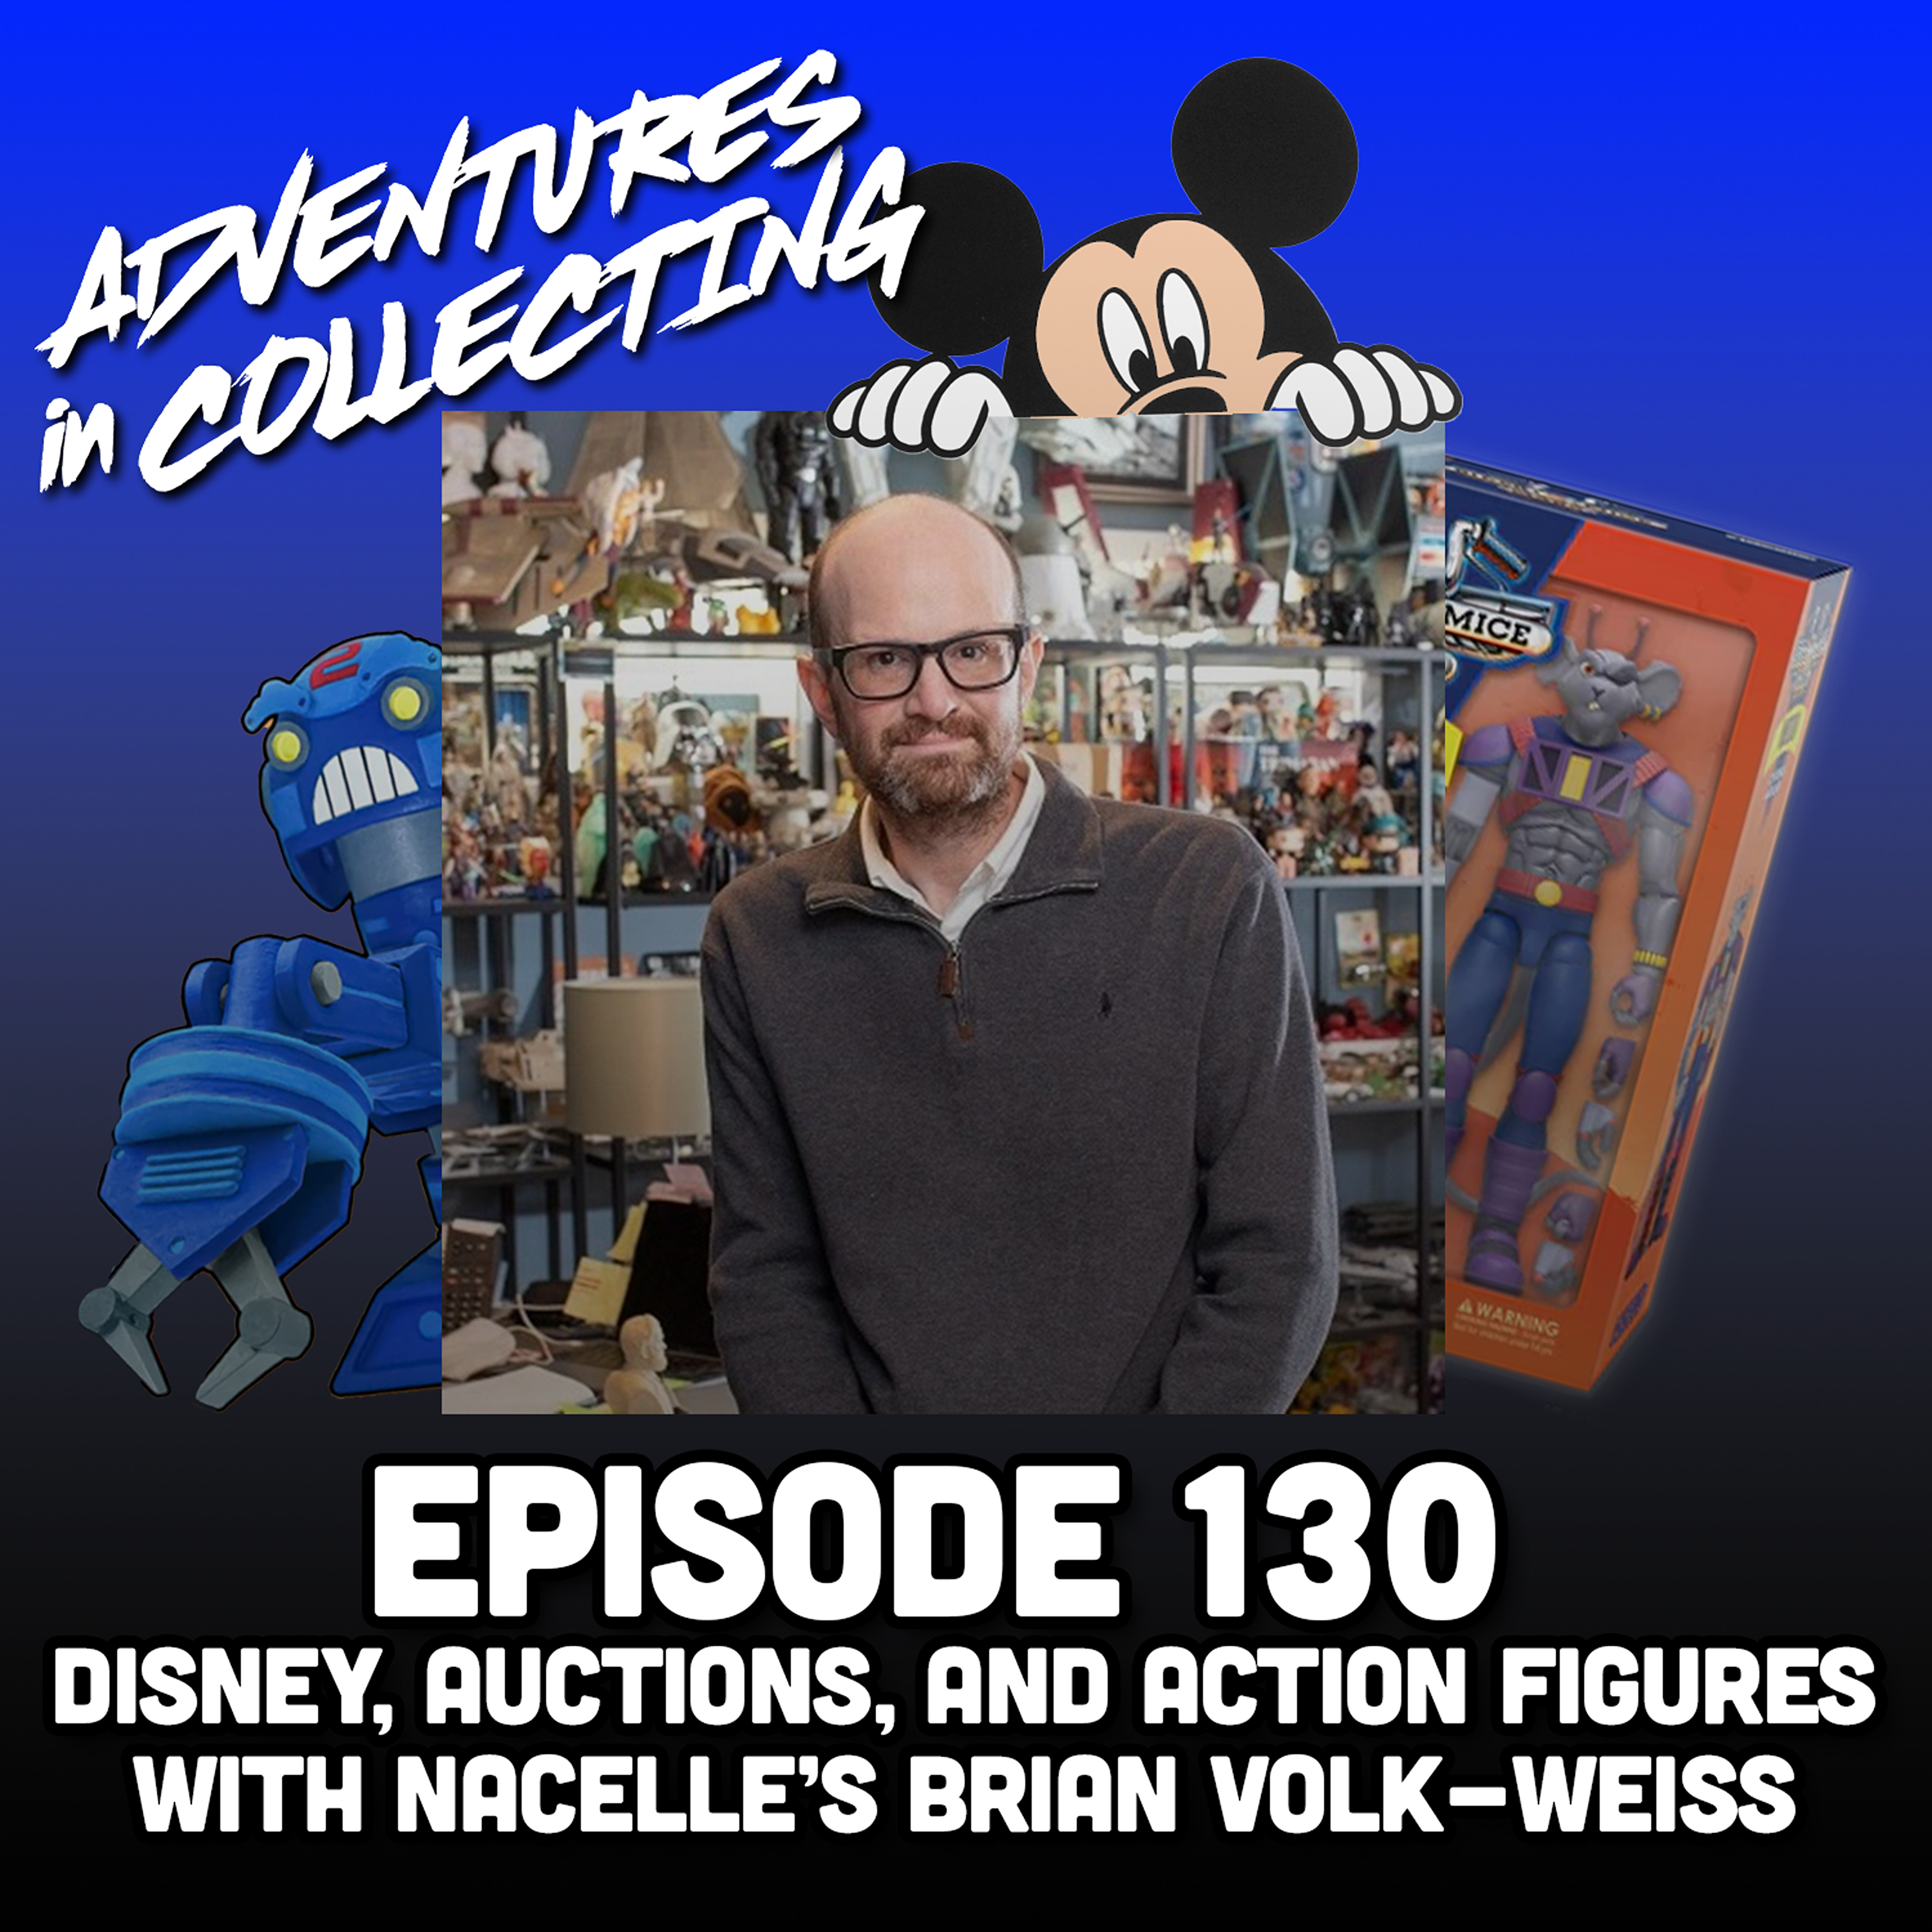 Disney, Auctions, and Action Figures with Nacelle's Brian Volk-Weiss